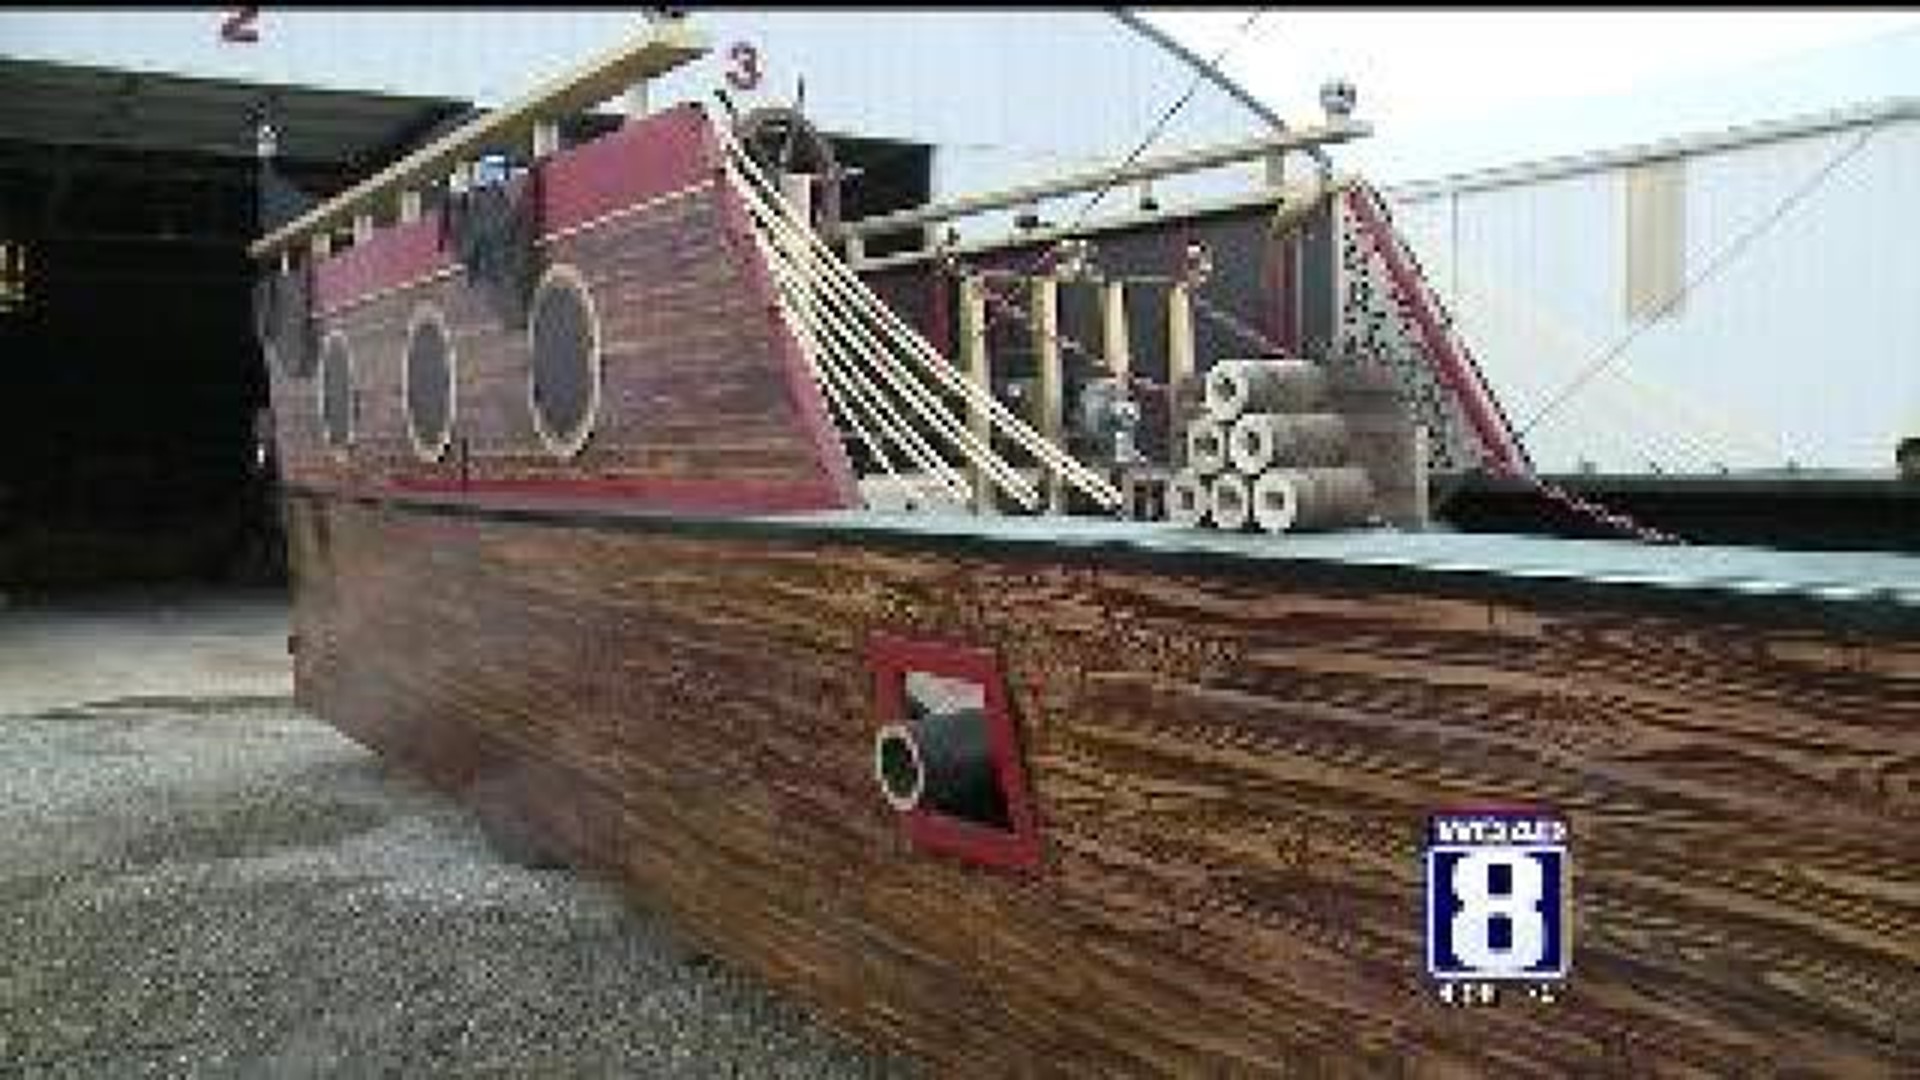 Recycled pirate ship goes on display